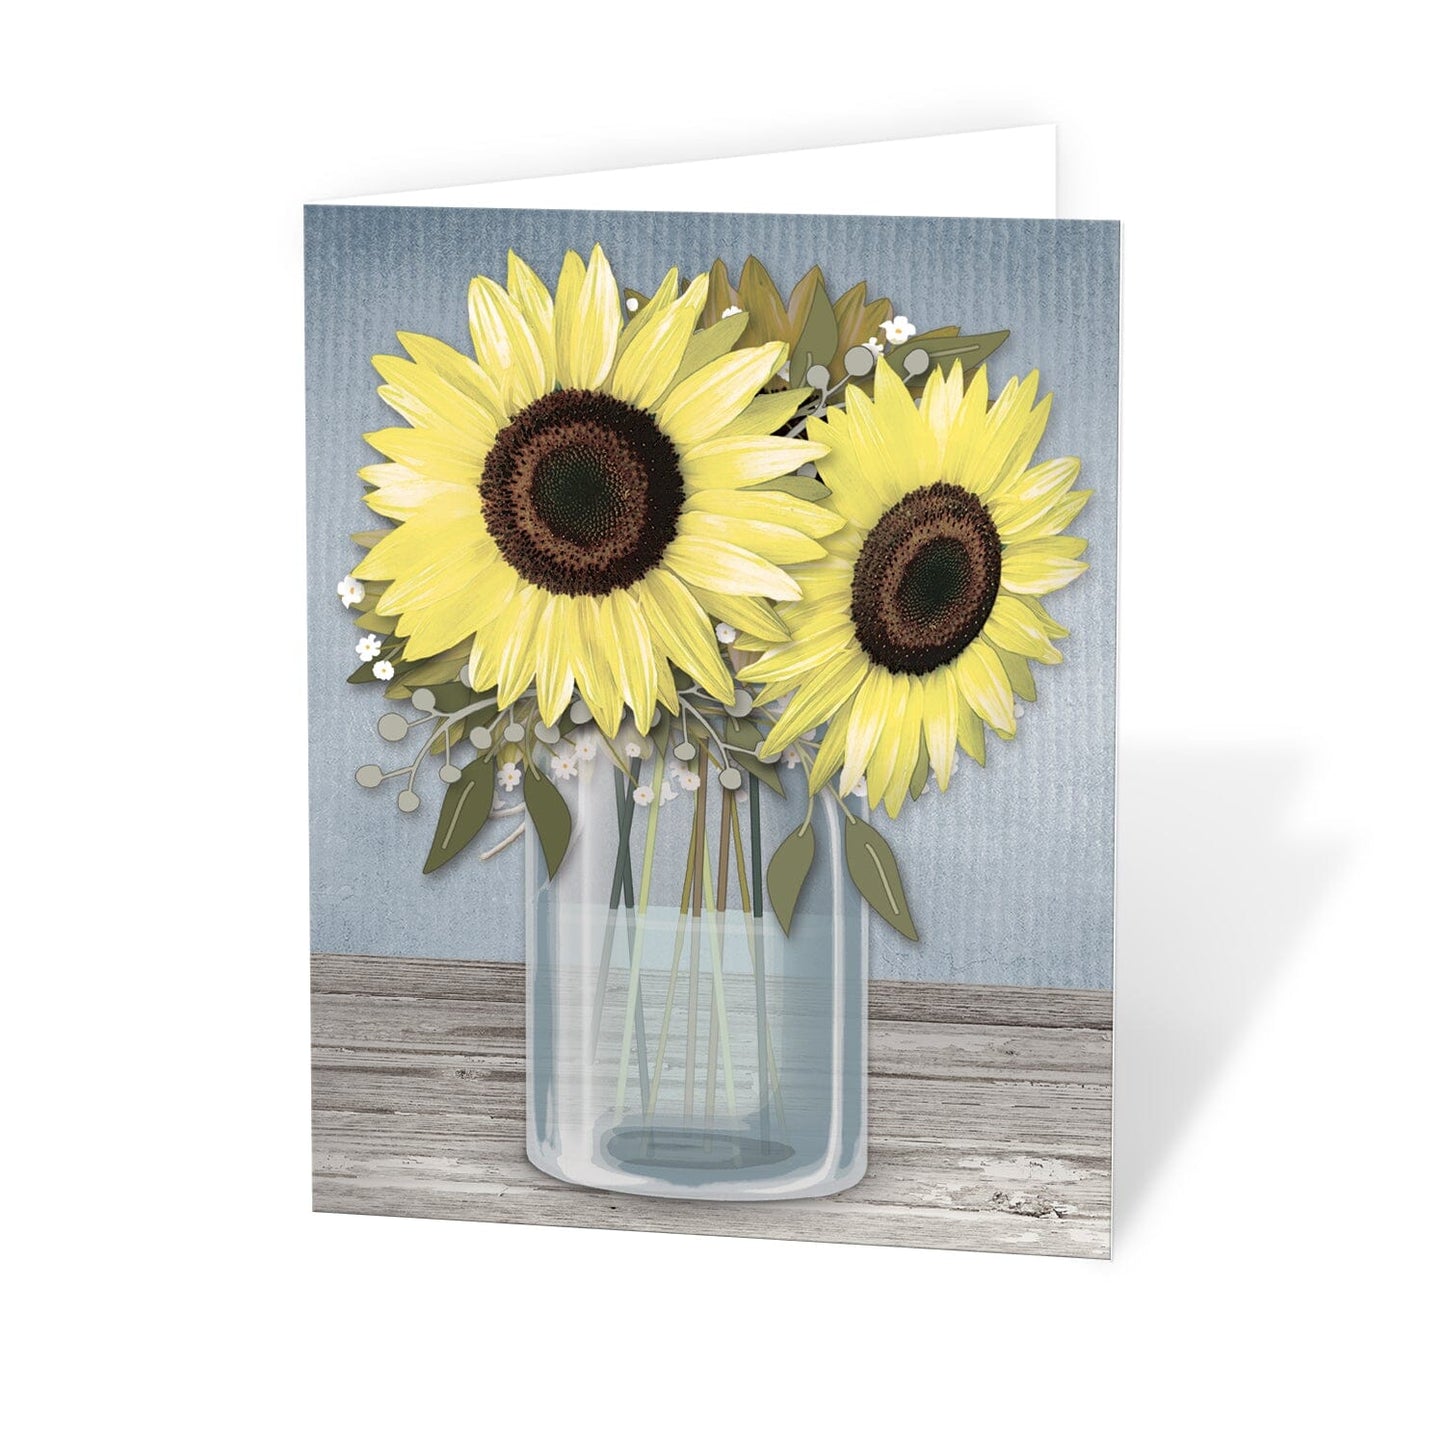 Sunflower Blue Mason Jar Rustic Note Cards at Artistically Invited. Sunflower blue mason jar rustic note cards with a rustic floral theme with yellow sunflowers in a mason jar filled with water, on a light wood tabletop, over a rustic blue background.